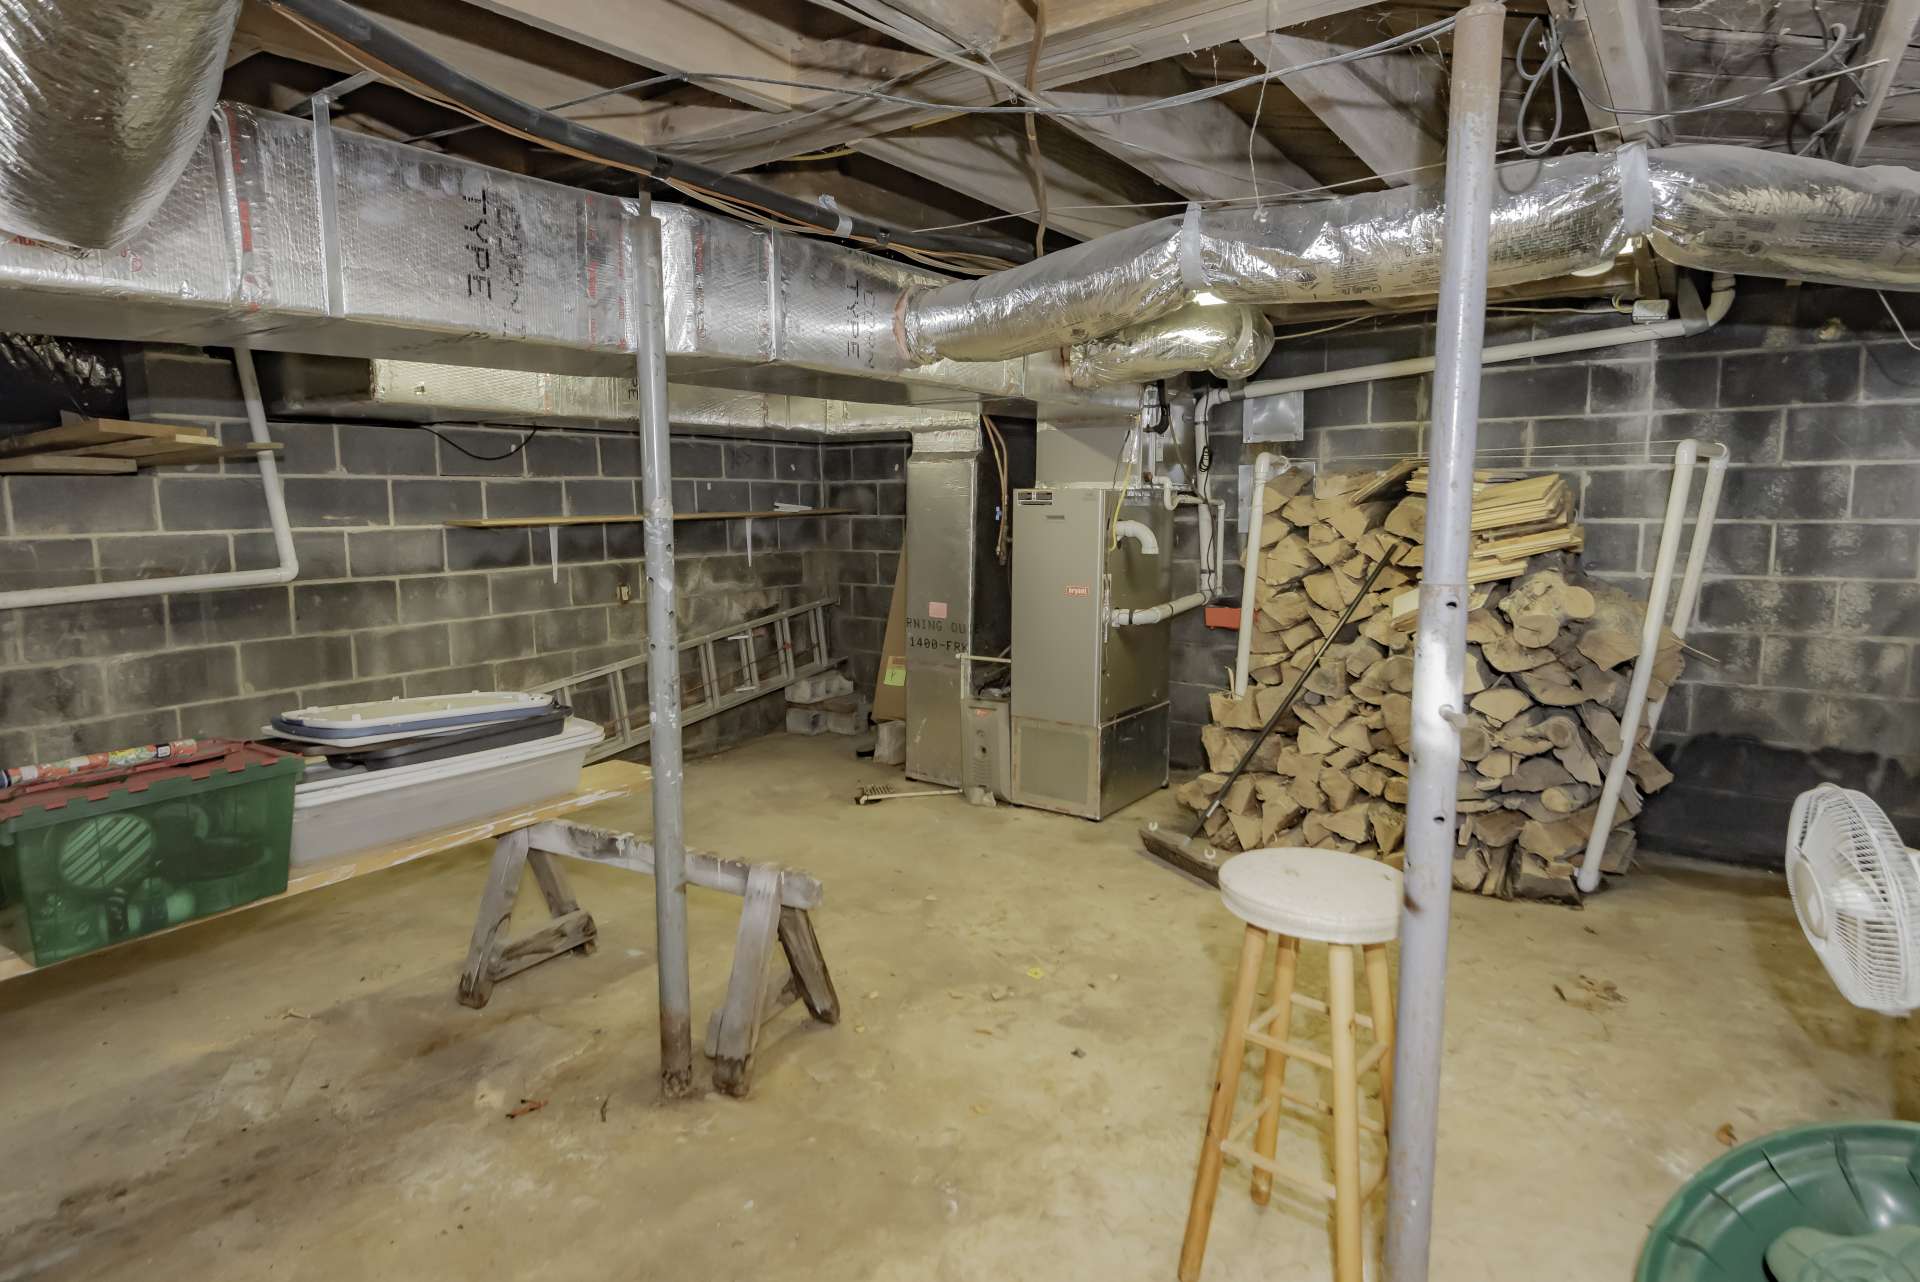 A partial unfinished basement provides plenty of space for storage or workshop space.